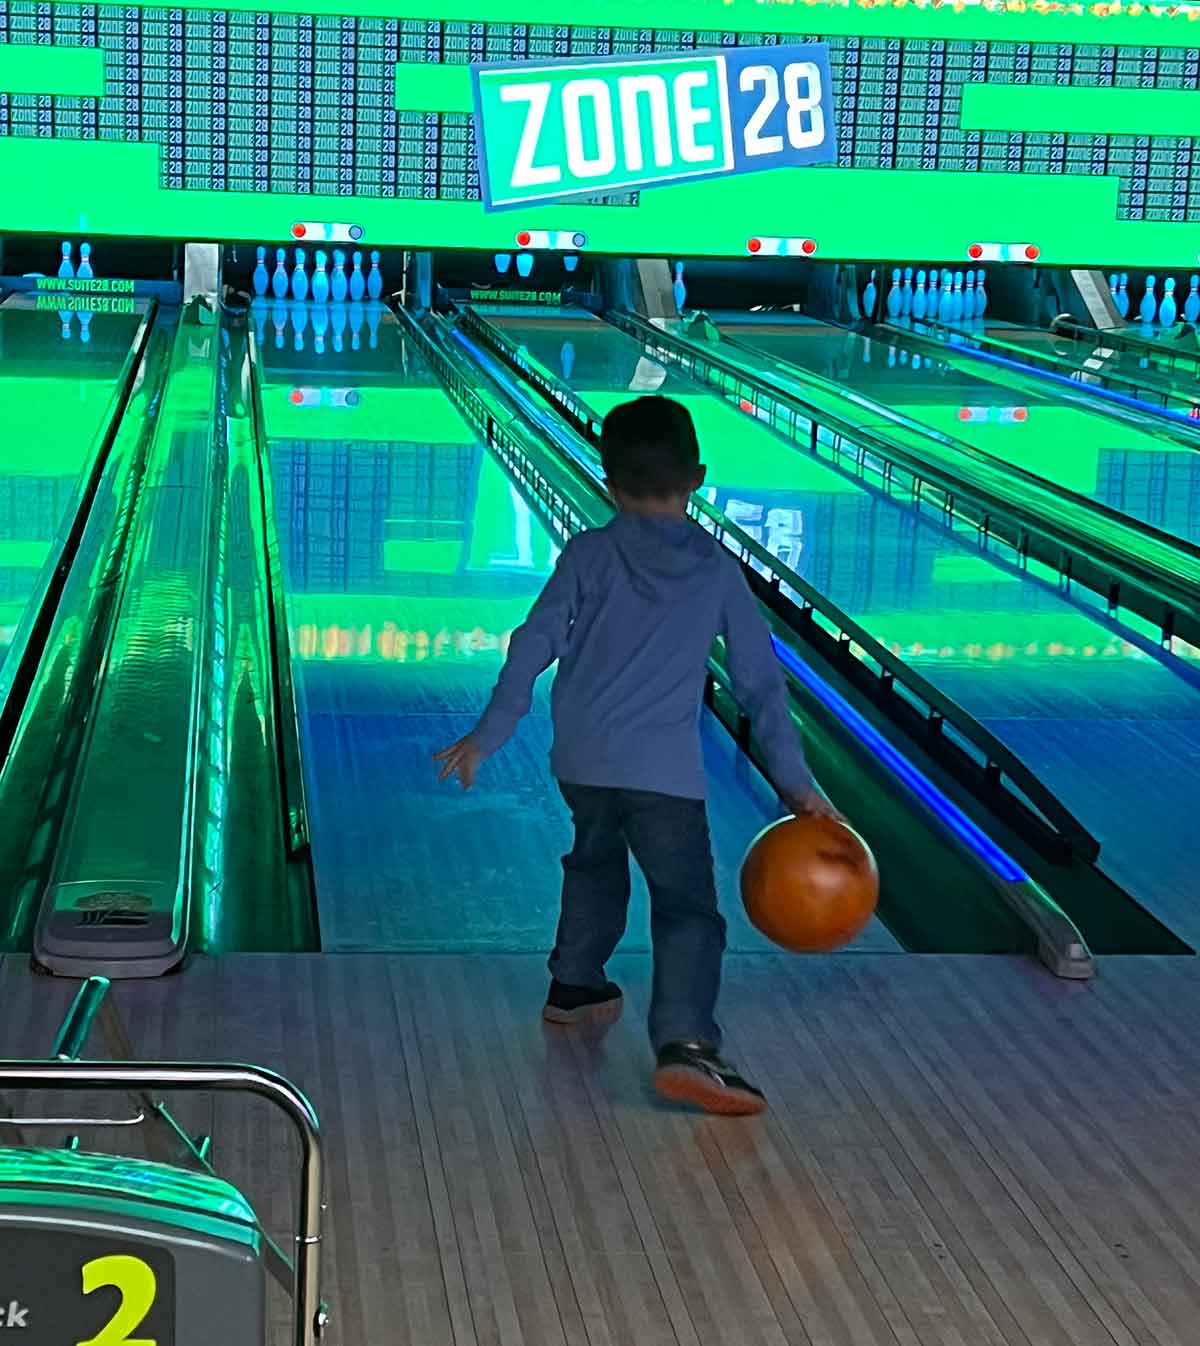 Little boy throwing an orange bowling ball, bright green and blue lights in background.